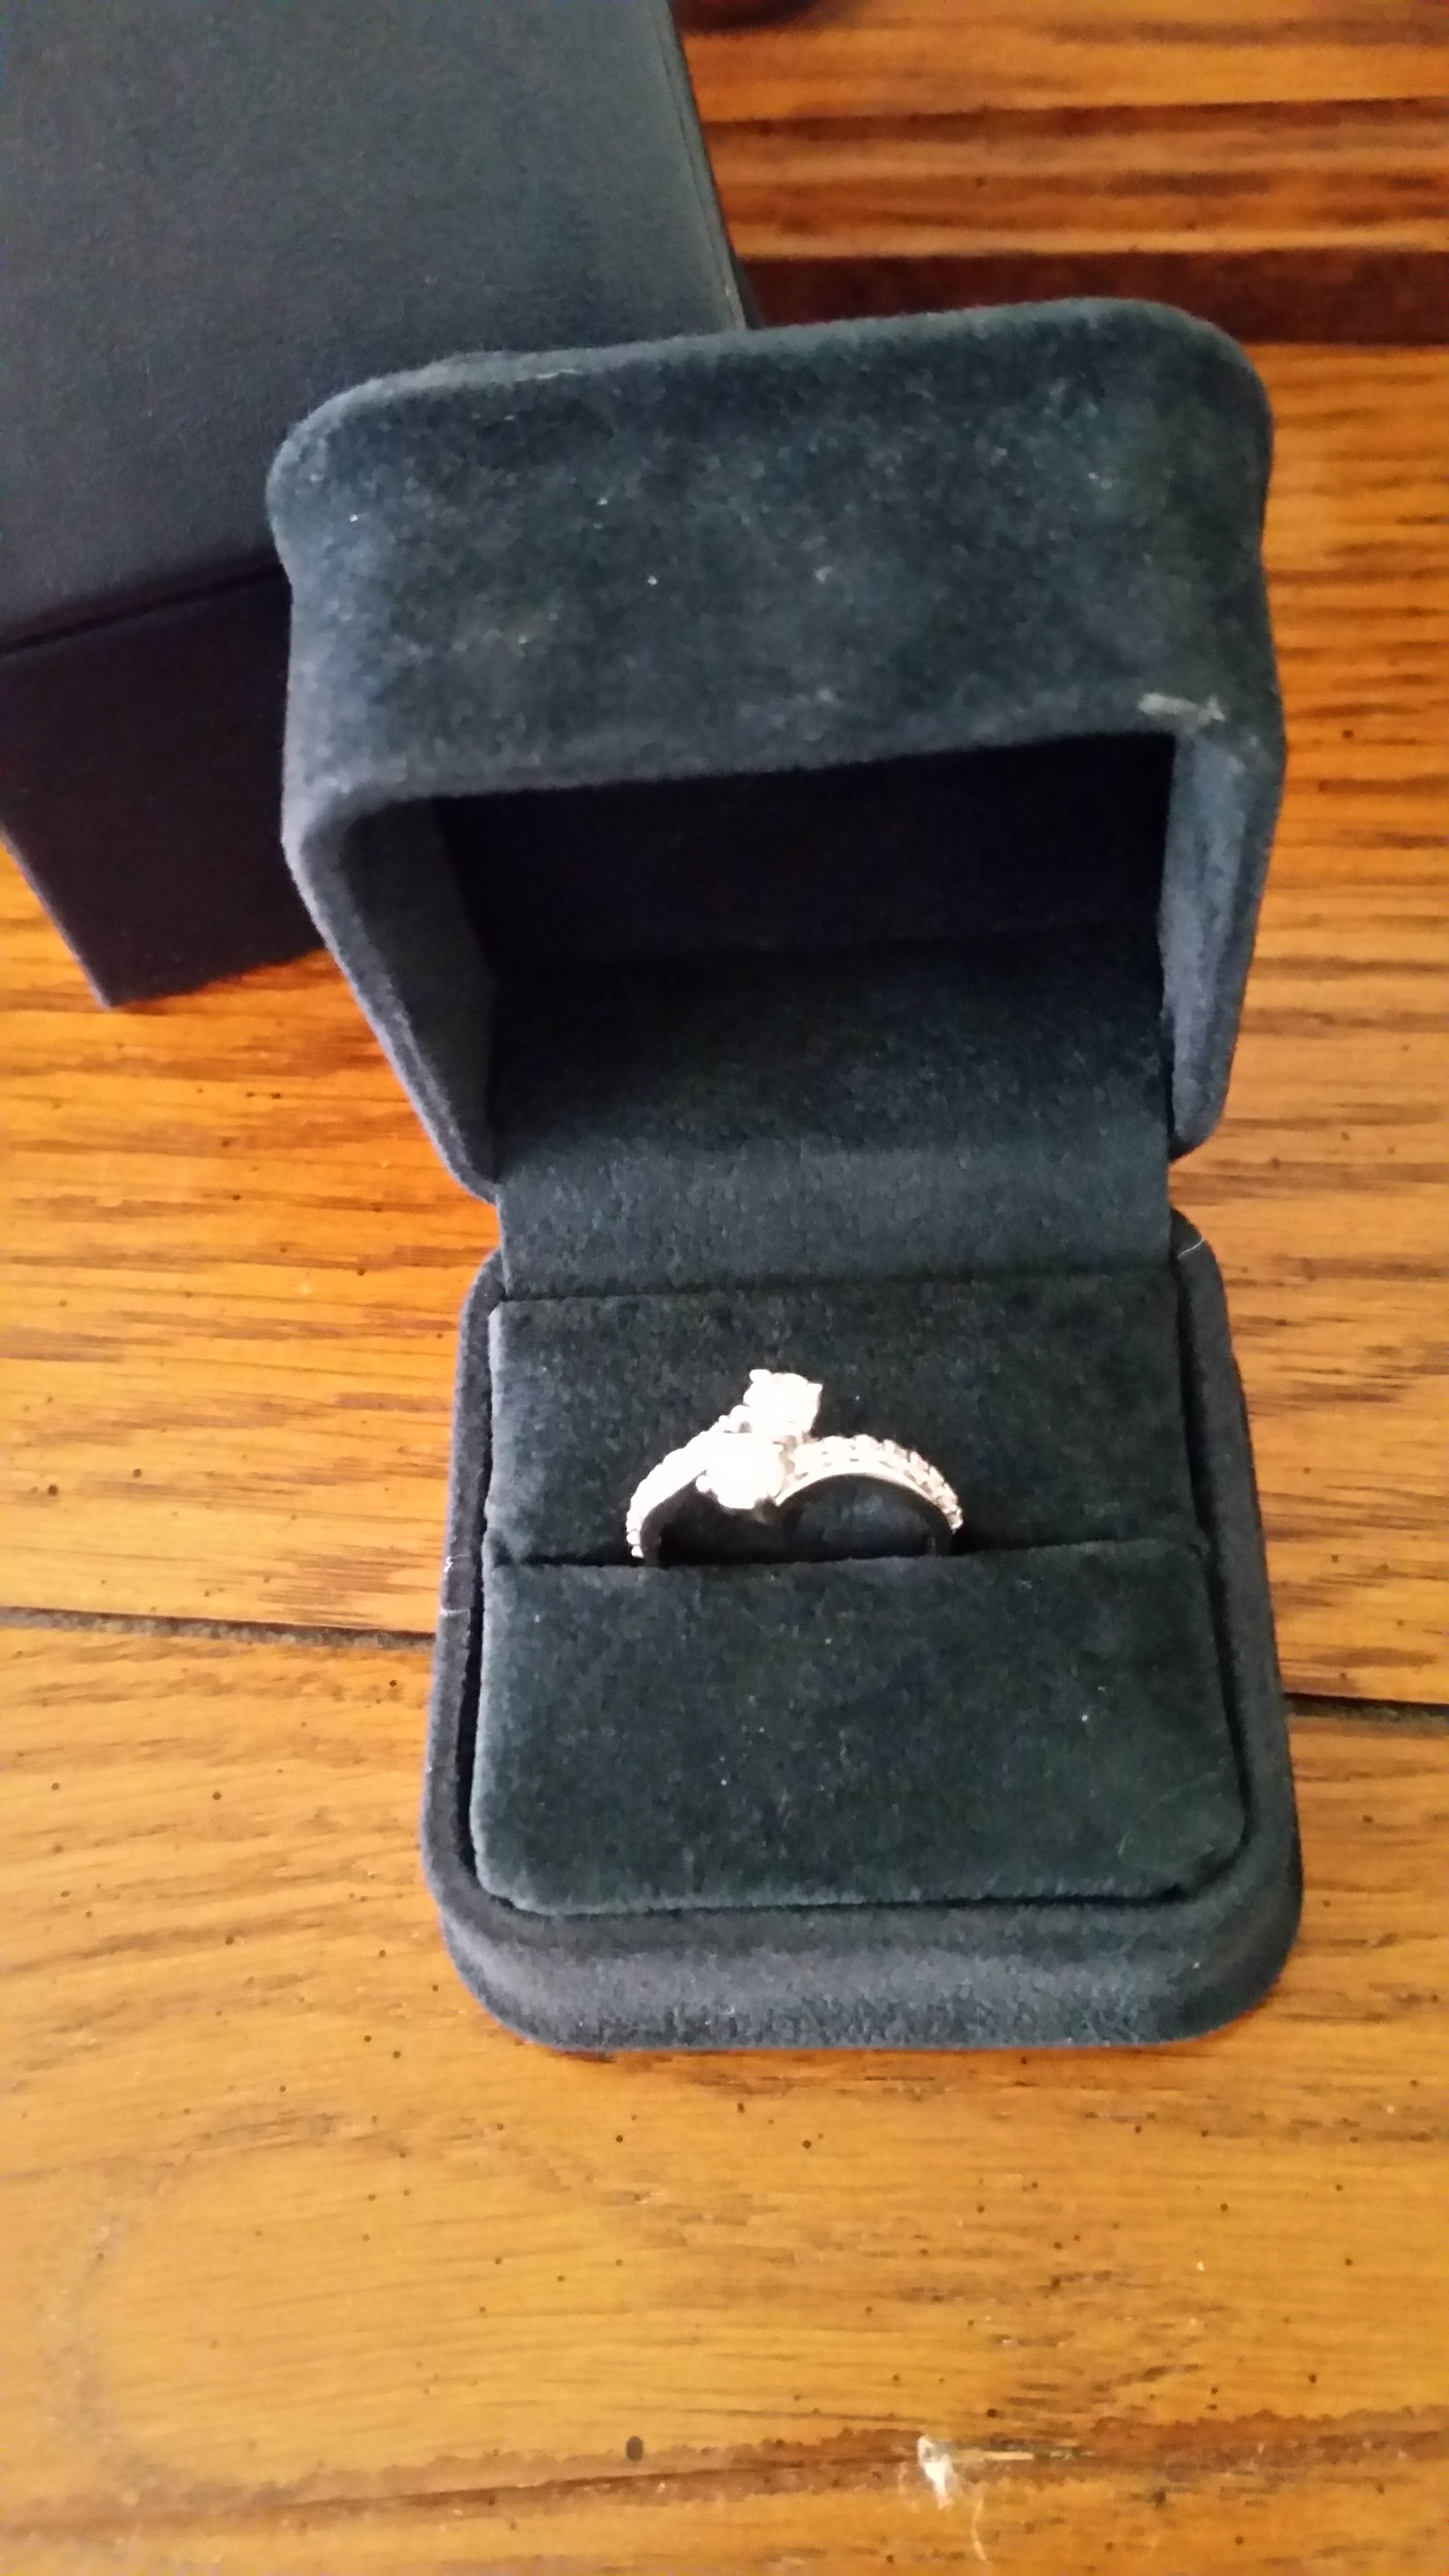 Engagement Ring , Ever US size 7. Never worn just tried on . 3,000 dollar ring , gave 1900 will take 1000.. The ring is 1 carat.